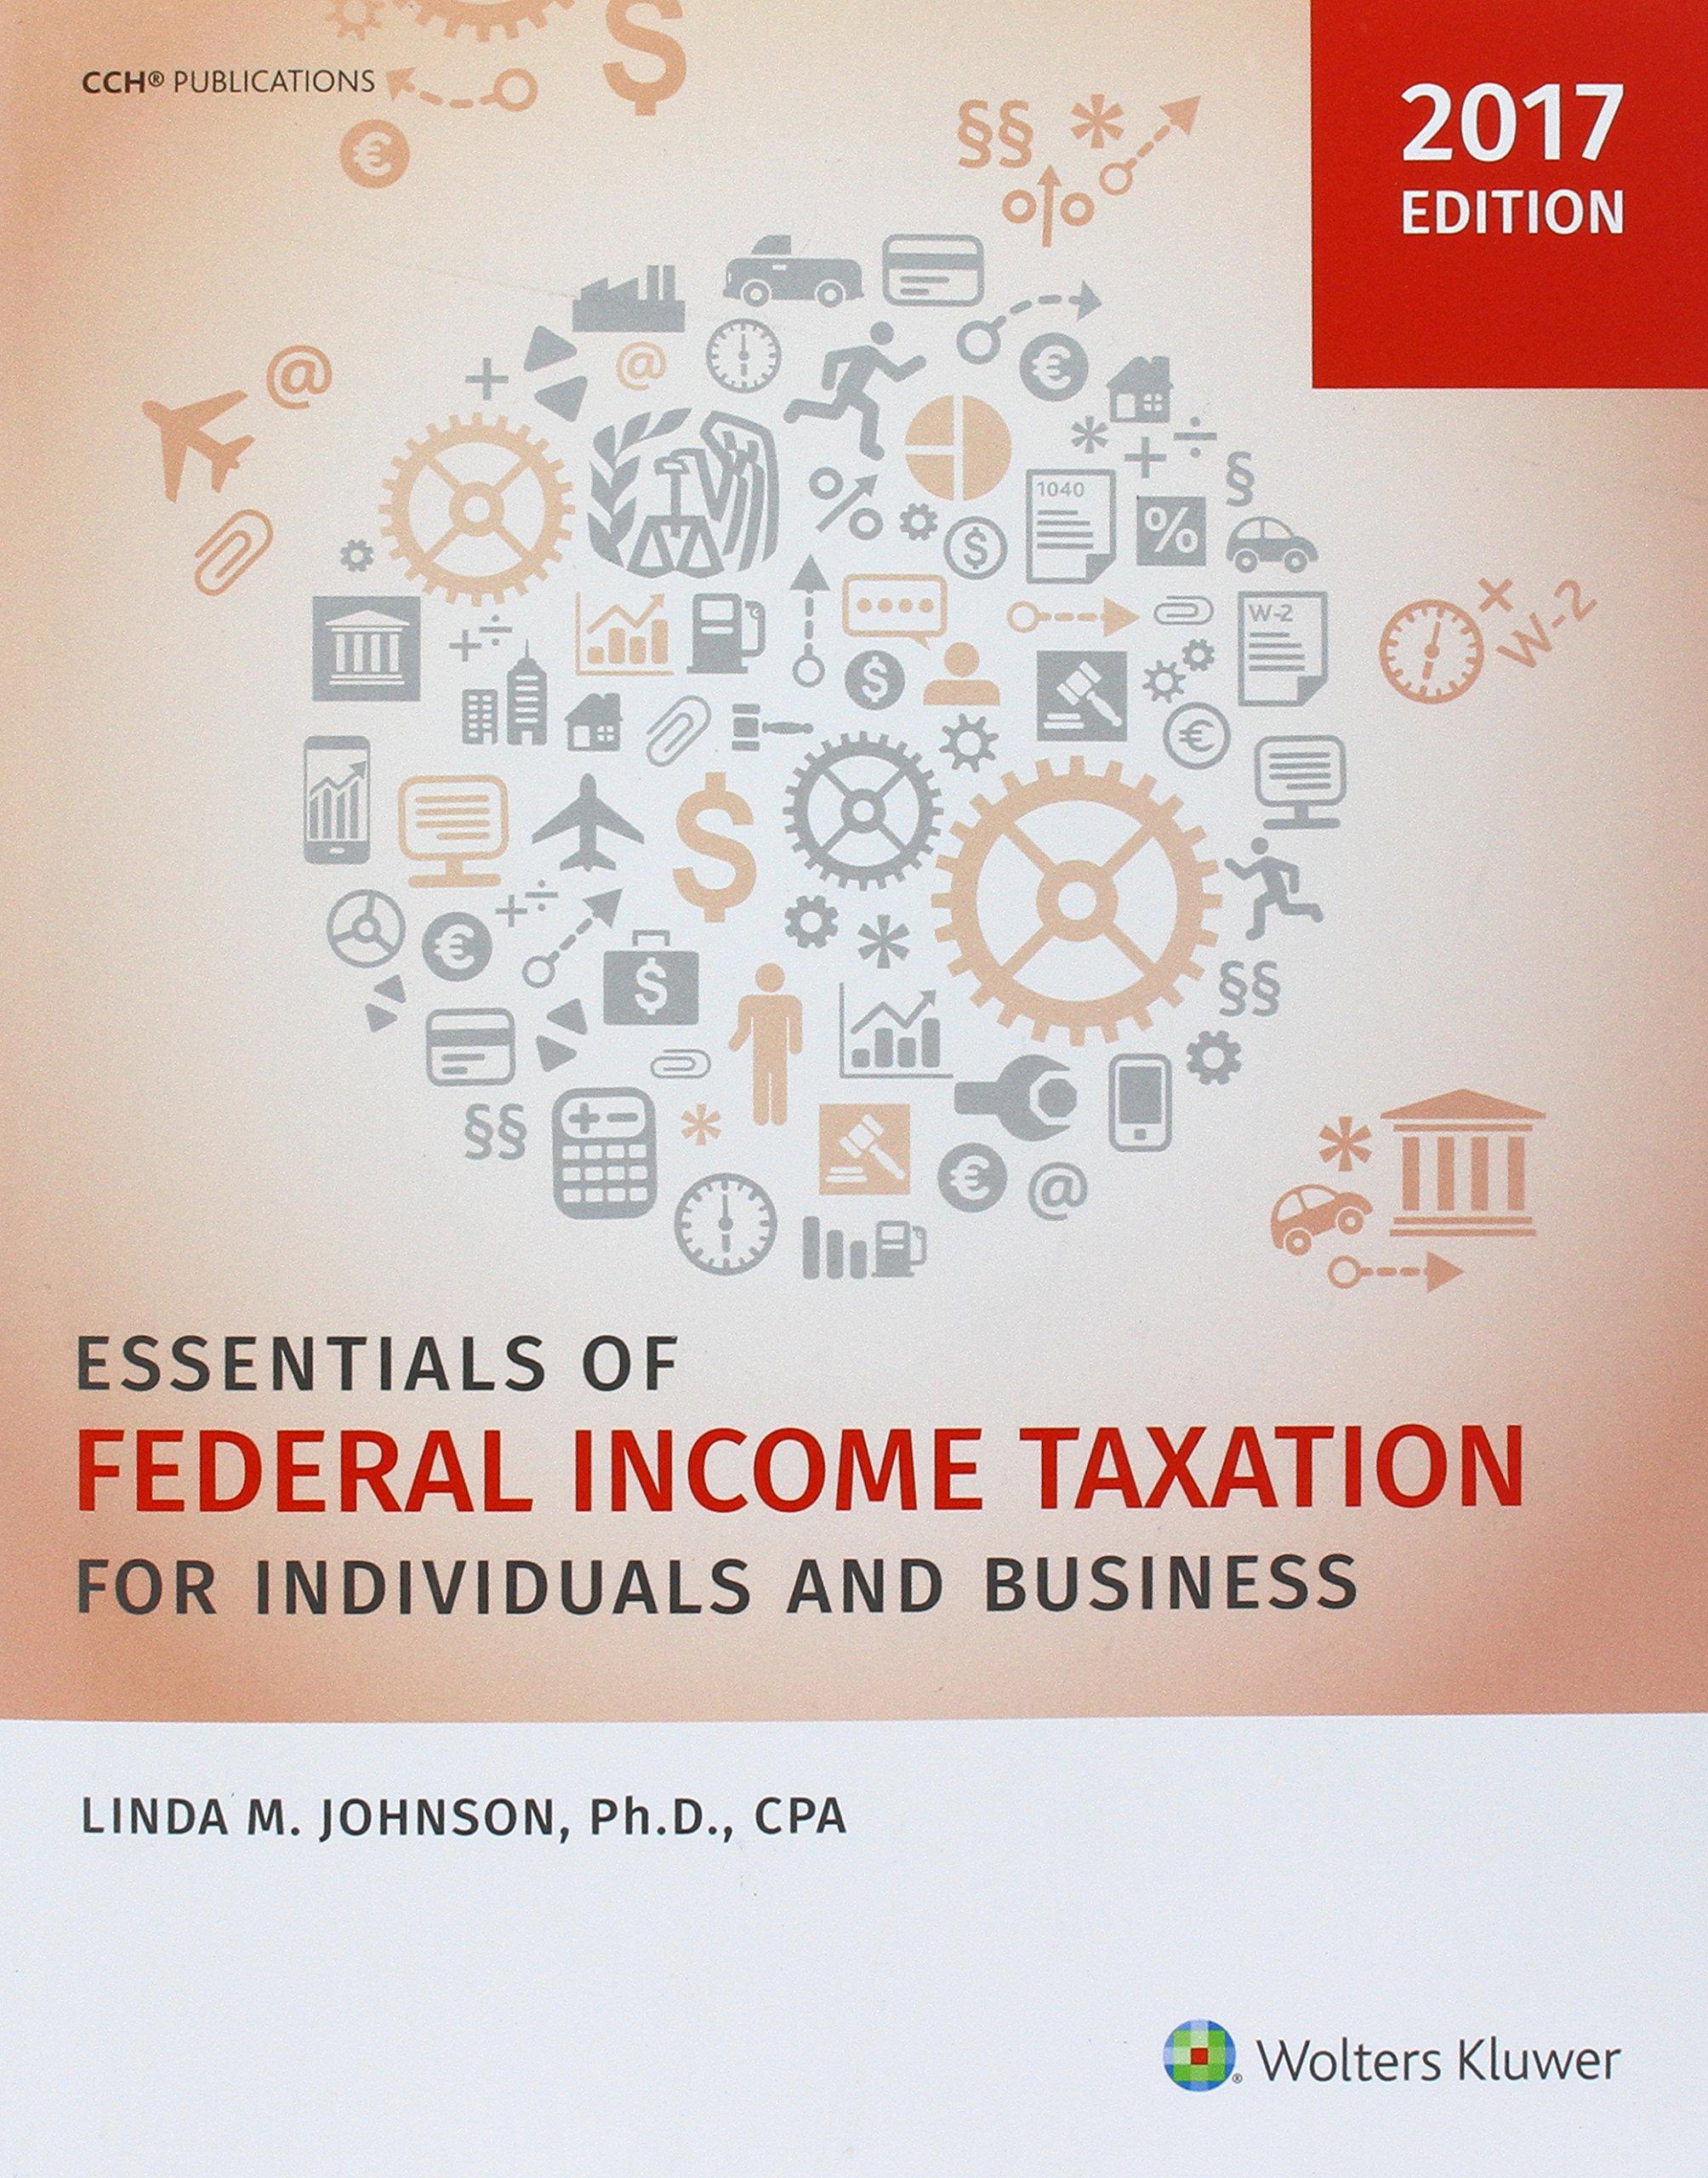 essentials of federal income taxation for individuals and business 2017 edition linda m. johnson 0808044869,